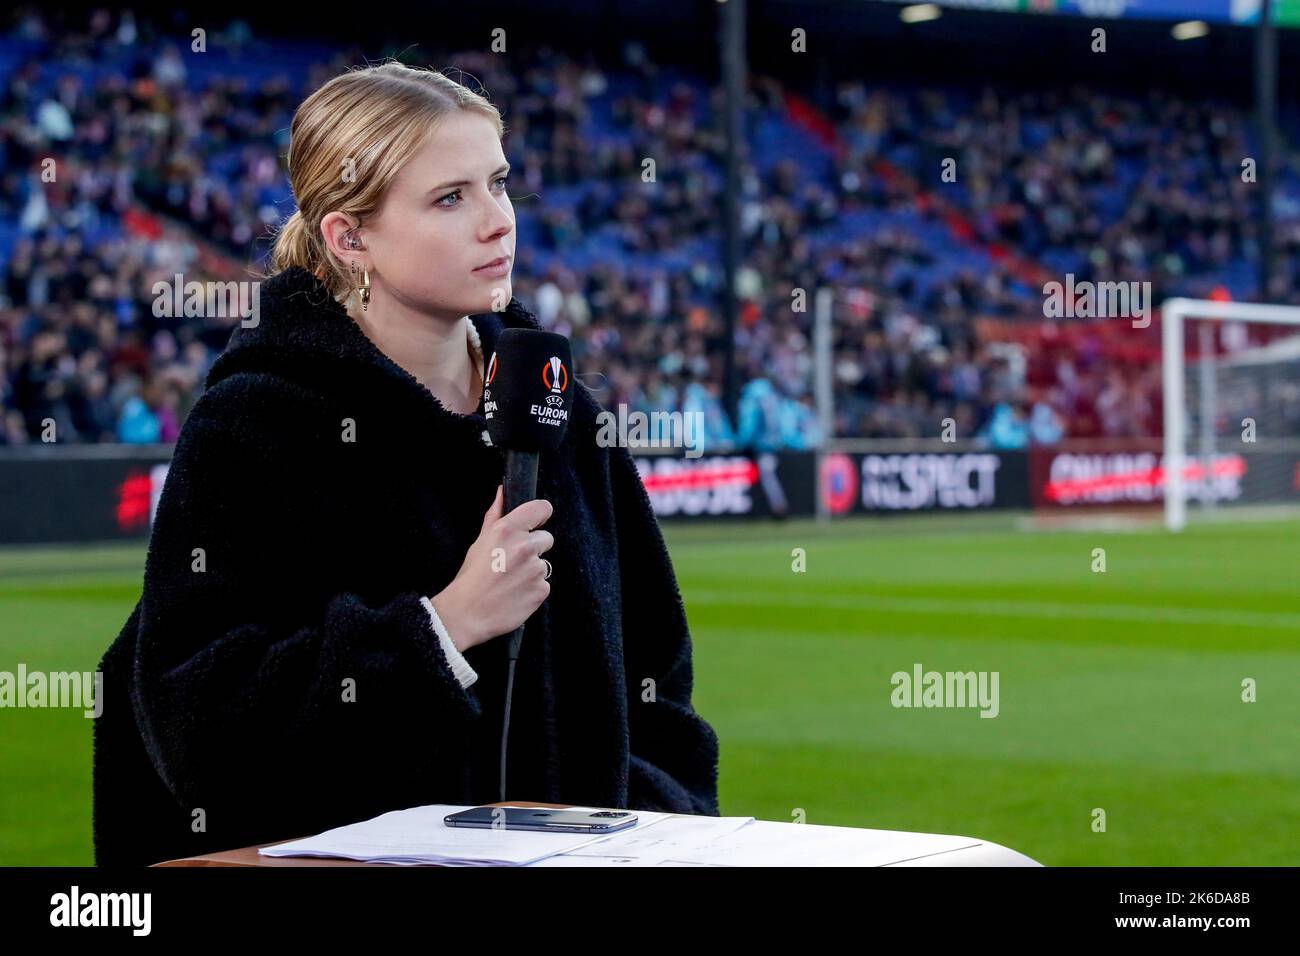 ROTTERDAM, NETHERLANDS - OCTOBER 13: Presentators Noa Vahle during the UEFA Europa League - Group F match between Feyenoord Rotterdam and FC Midtjylland at De Kuip on October 13, 2022 in Rotterdam, Netherlands (Photo by Broer van den Boom/Orange Pictures) Stock Photo